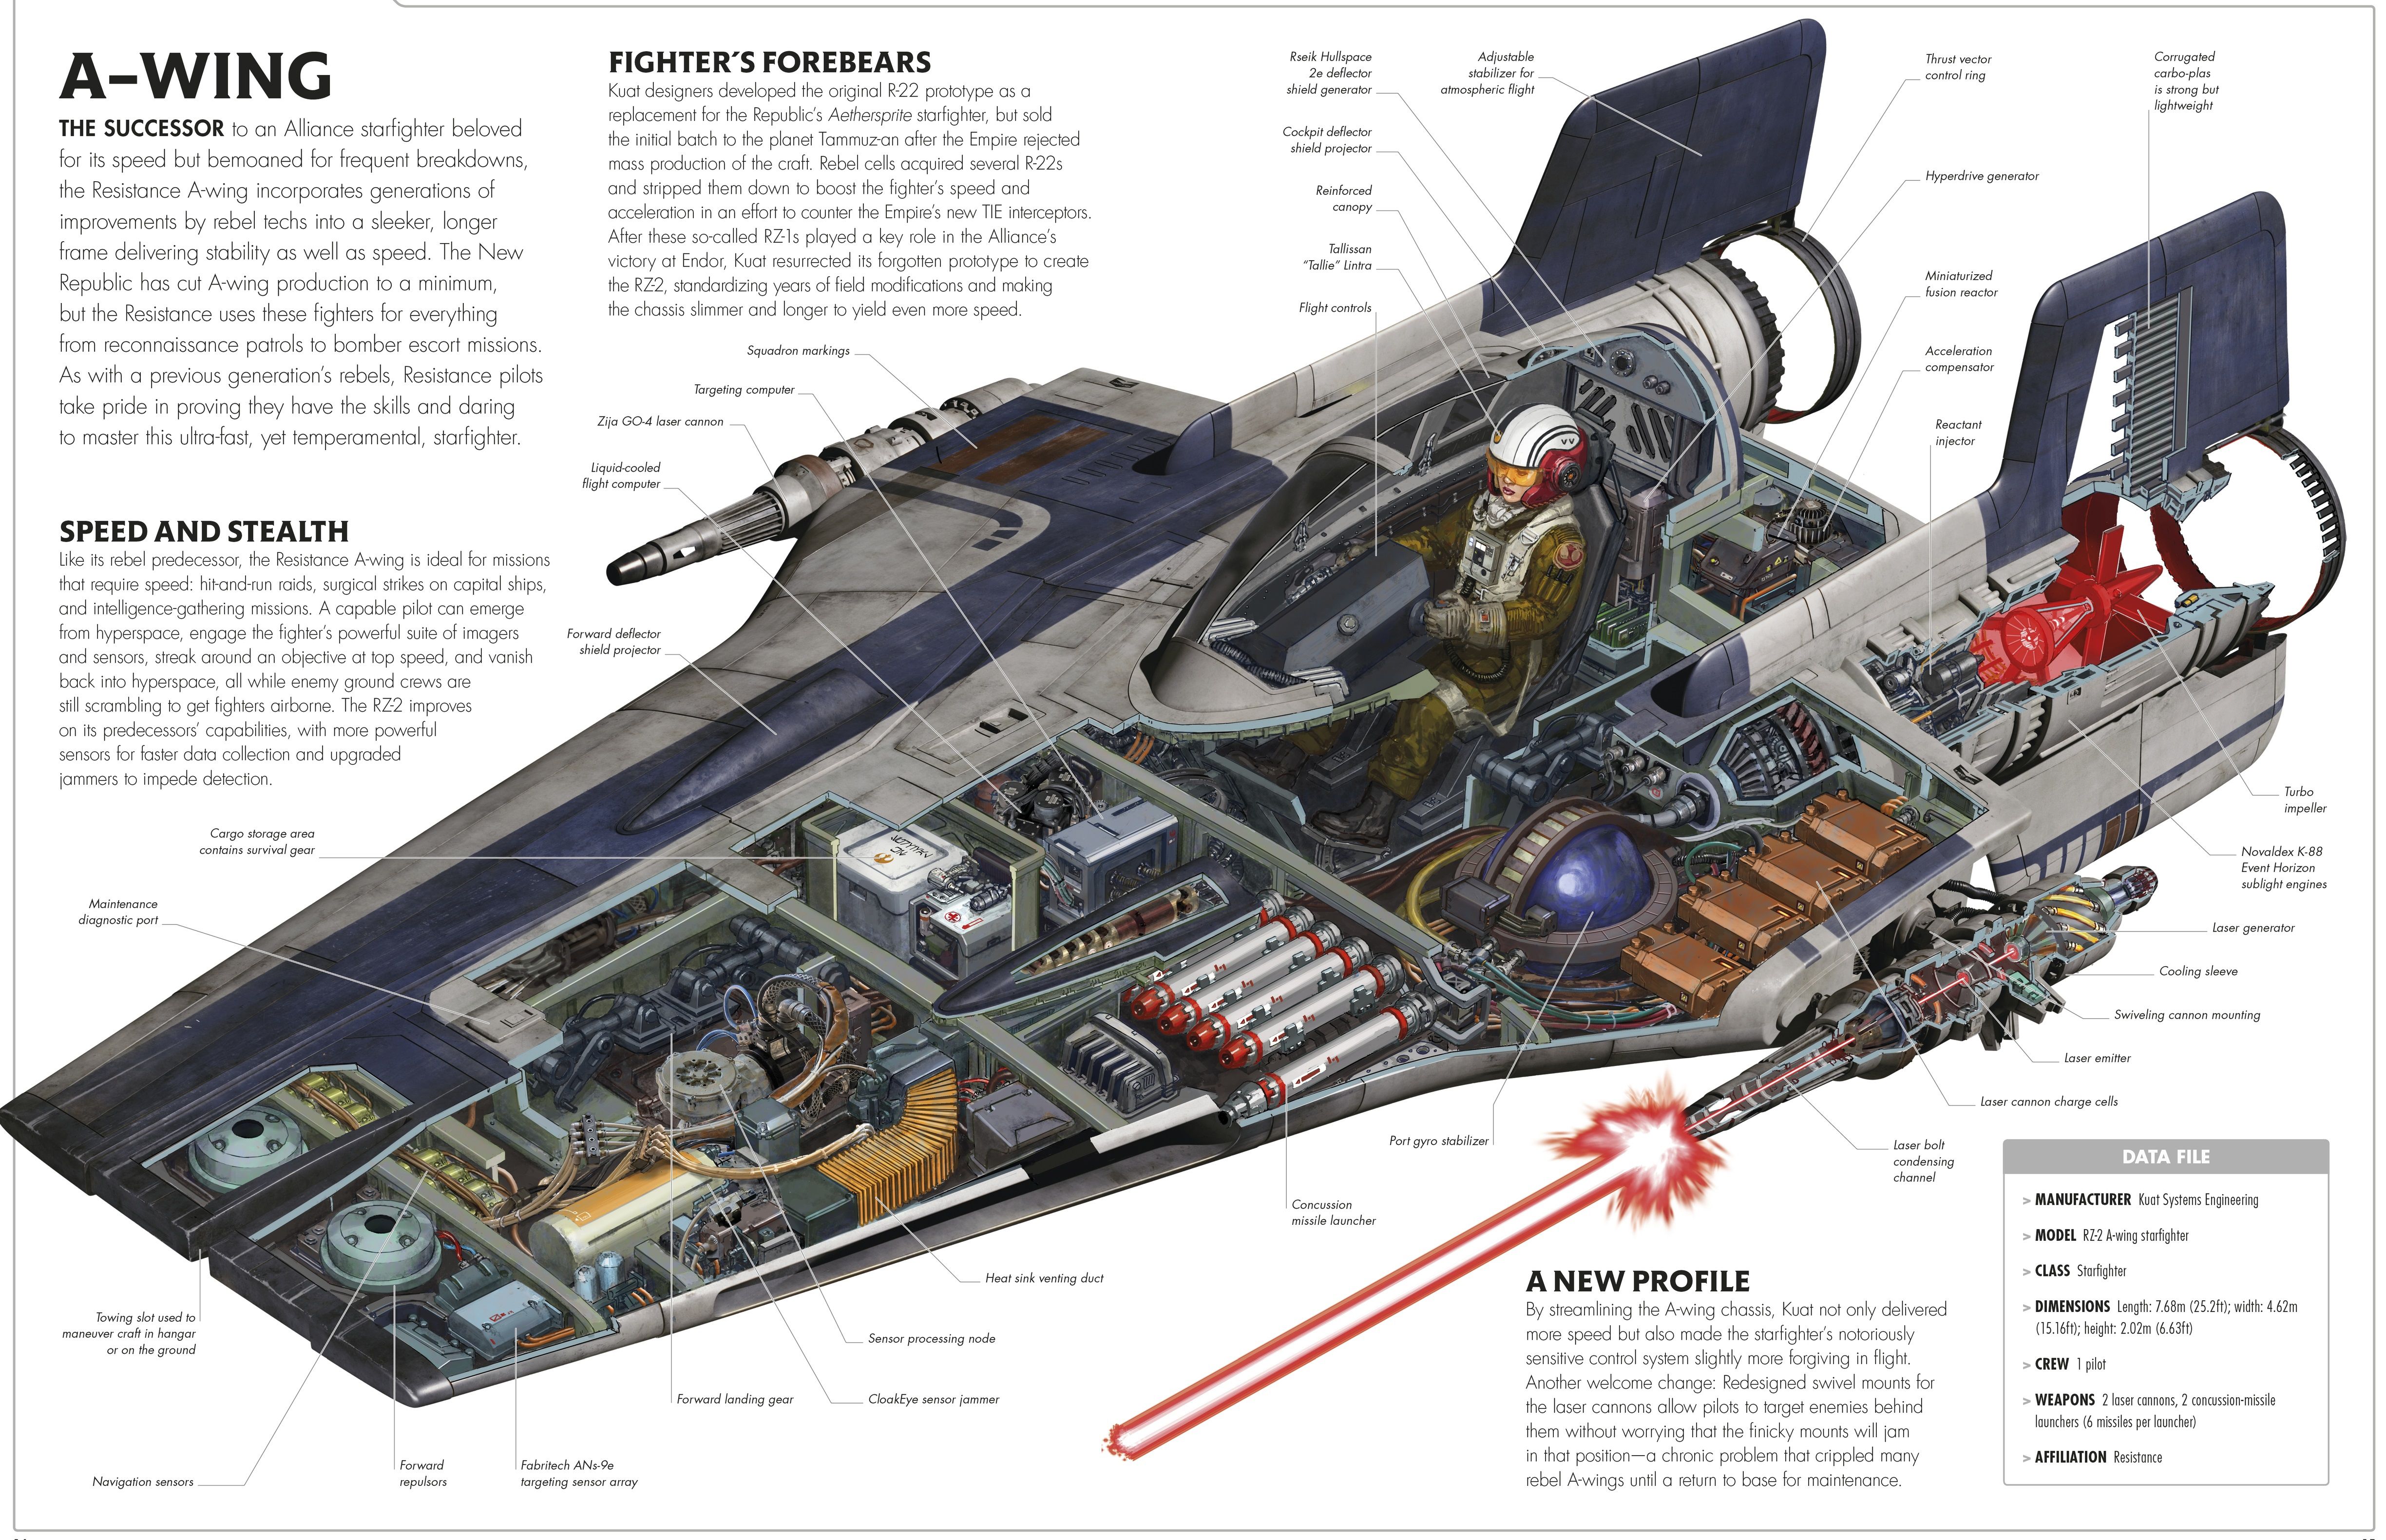 Wallpaper, Star Wars, A Wing, infographics 4897x3161